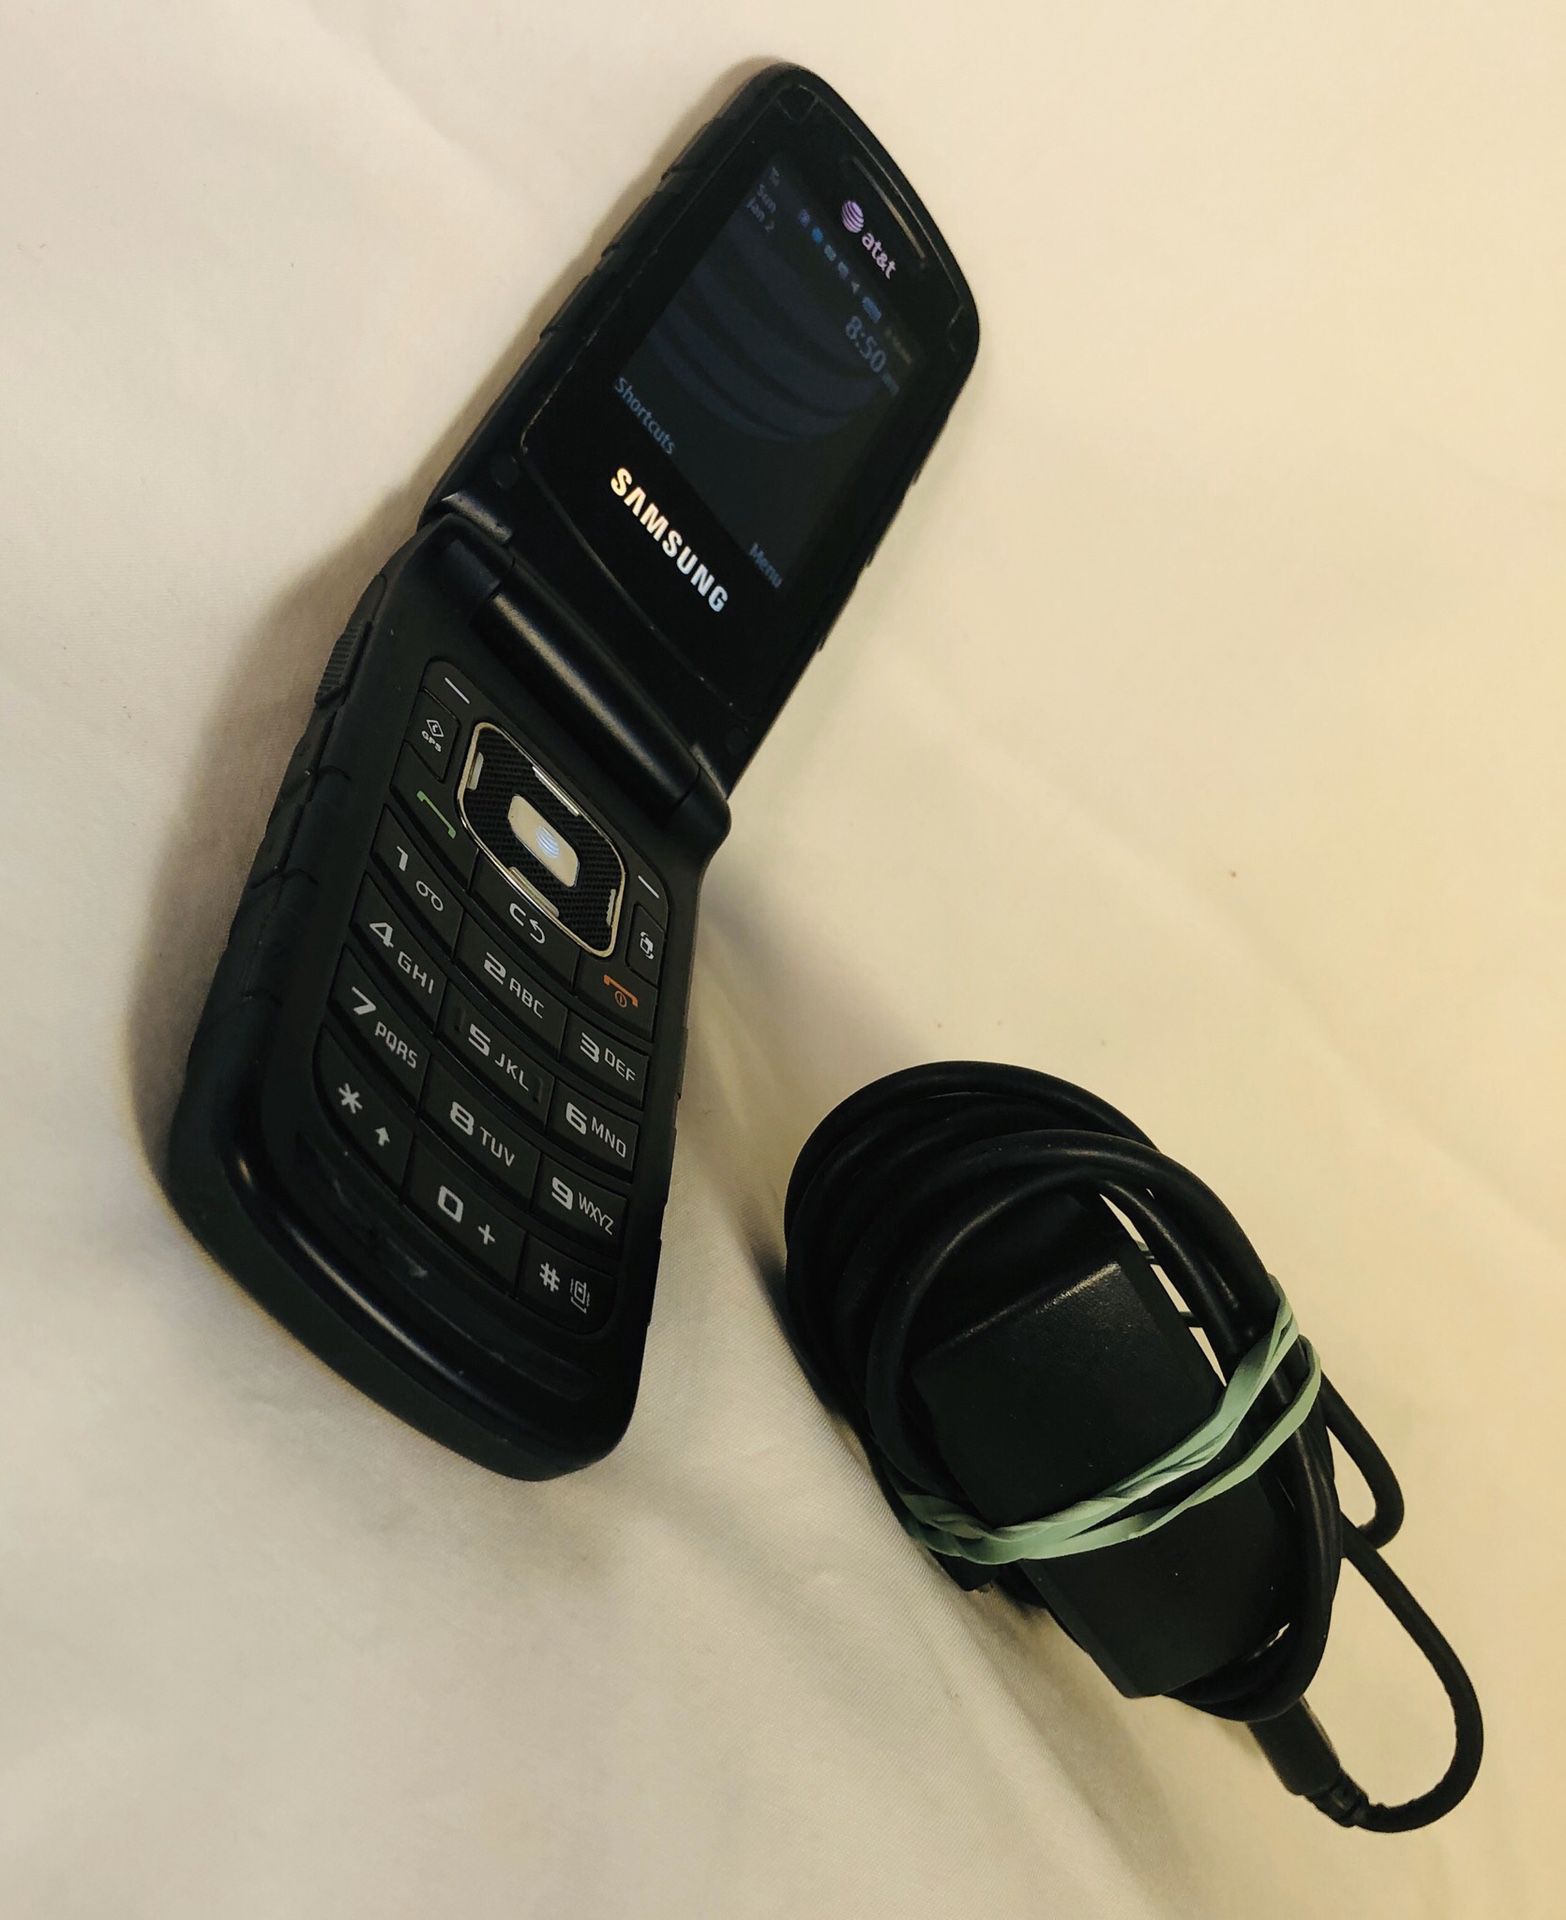 Samsung flip phone SGH-A847 AT&T with charger